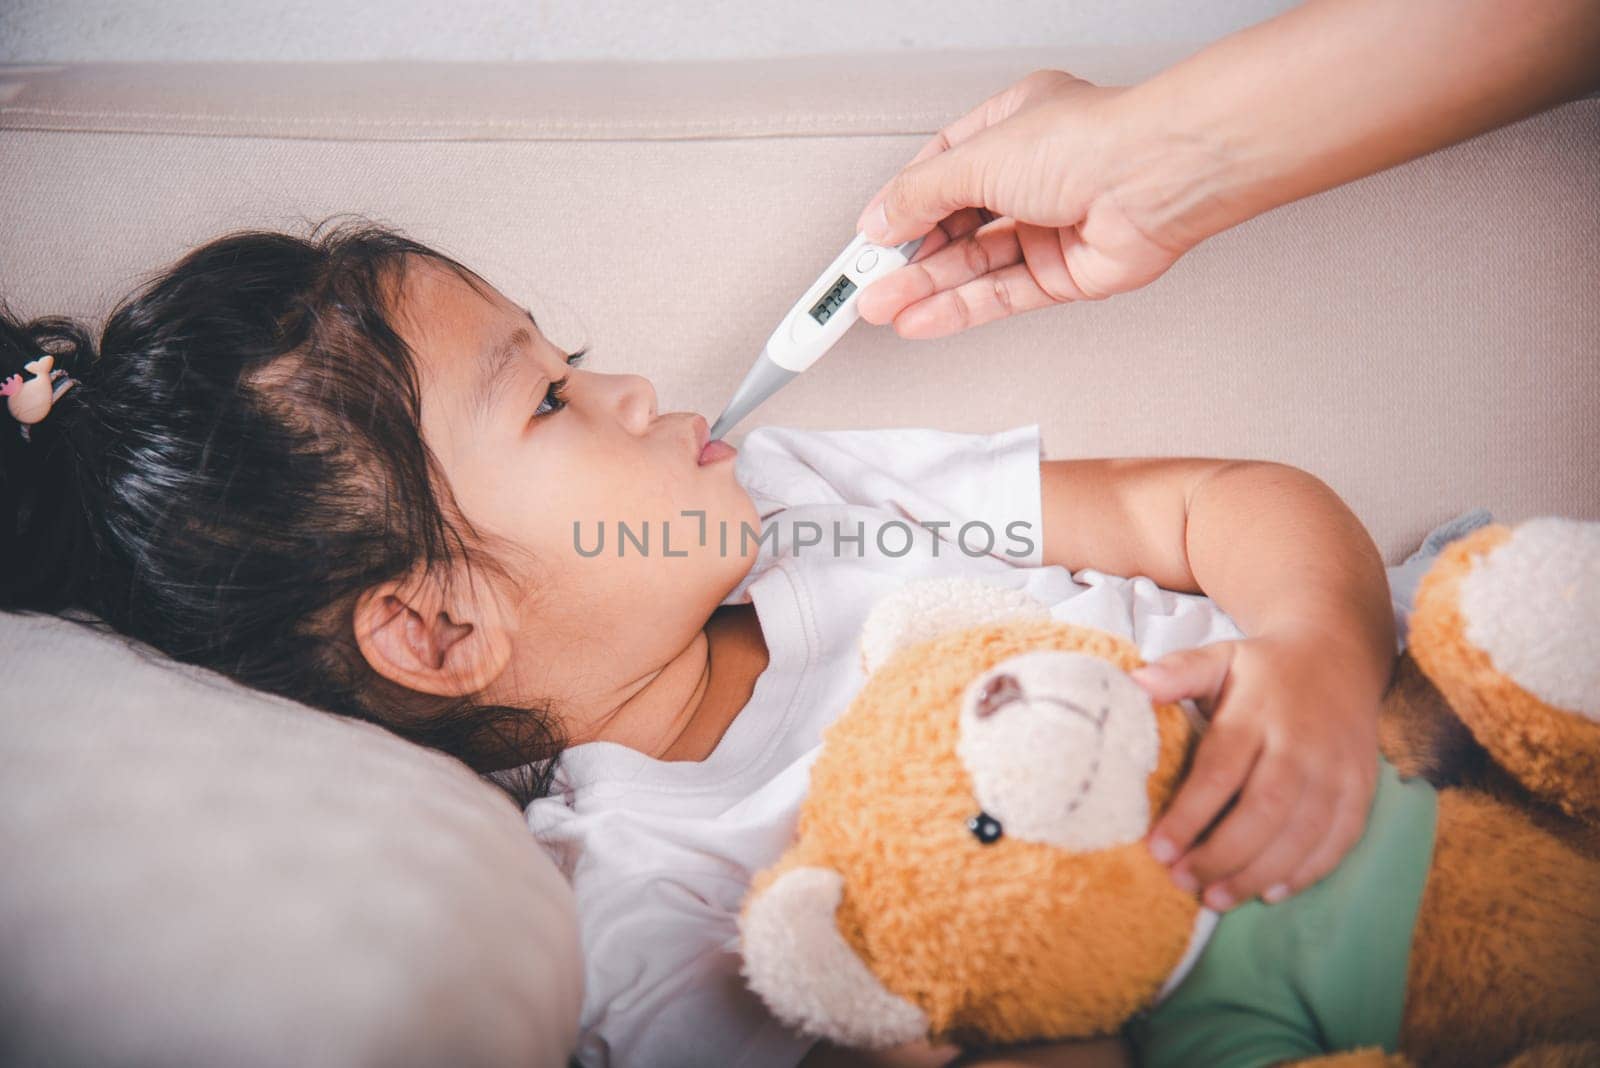 Mother parent checking temperature of her sick daughter with digital thermometer in mouth by Sorapop